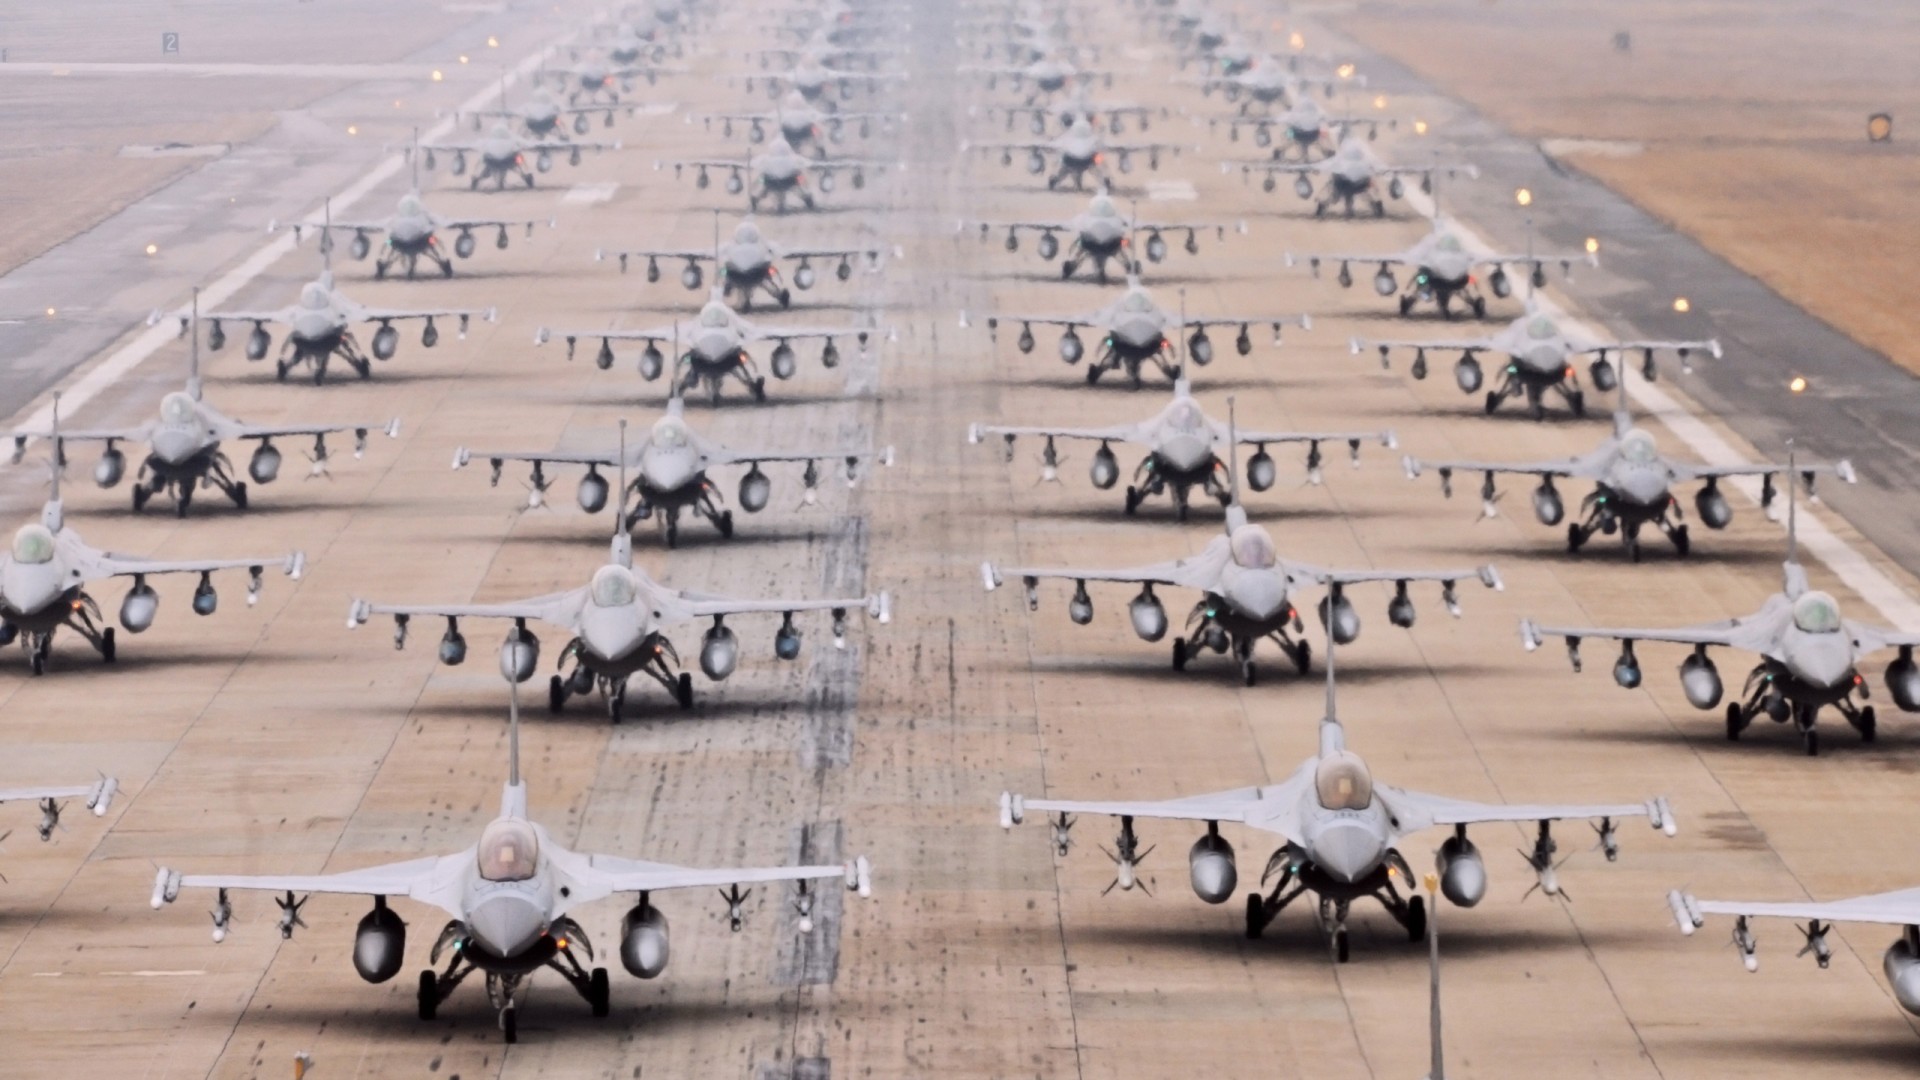 General 1920x1080 General Dynamics F-16 Fighting Falcon military aircraft aircraft military vehicle vehicle Elephant Walk US Air Force Republic of Korea Armed Forces ROK Air Force South Korea American aircraft jets runway Kunsan Air Base military General Dynamics frontal view